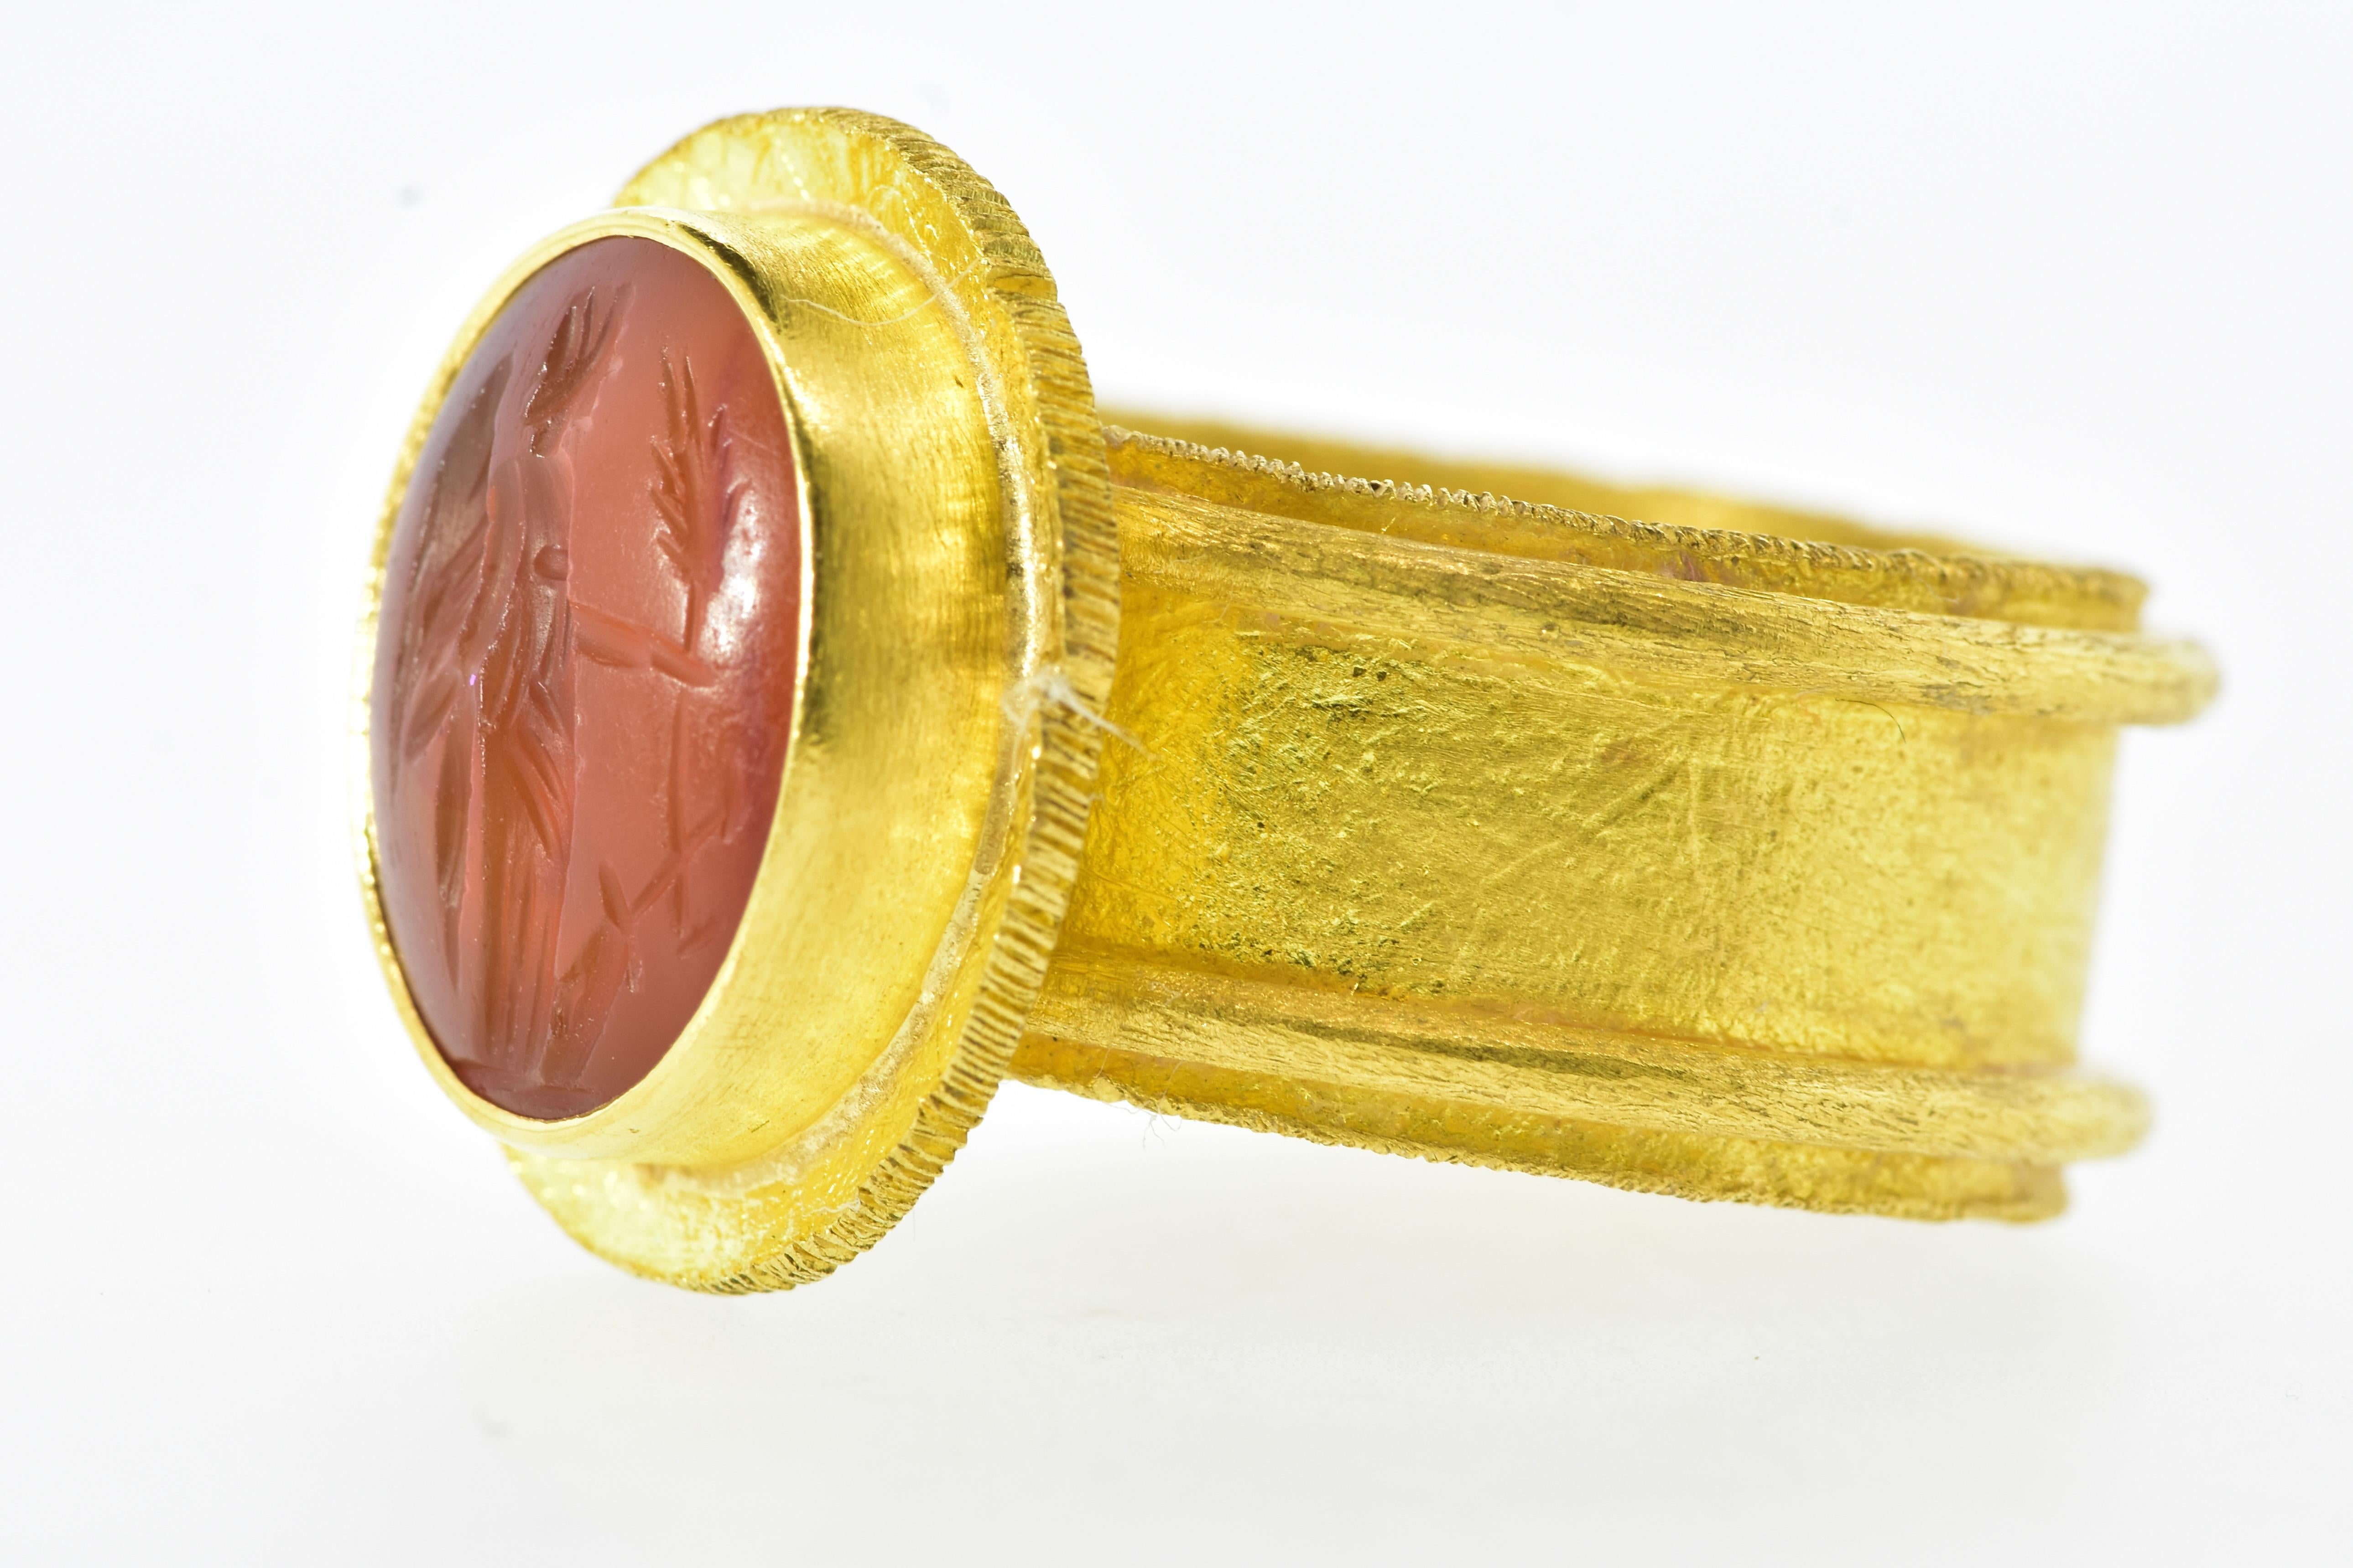 22K Large Ring Centering an Antique Intaglio, c. 1850 For Sale 2